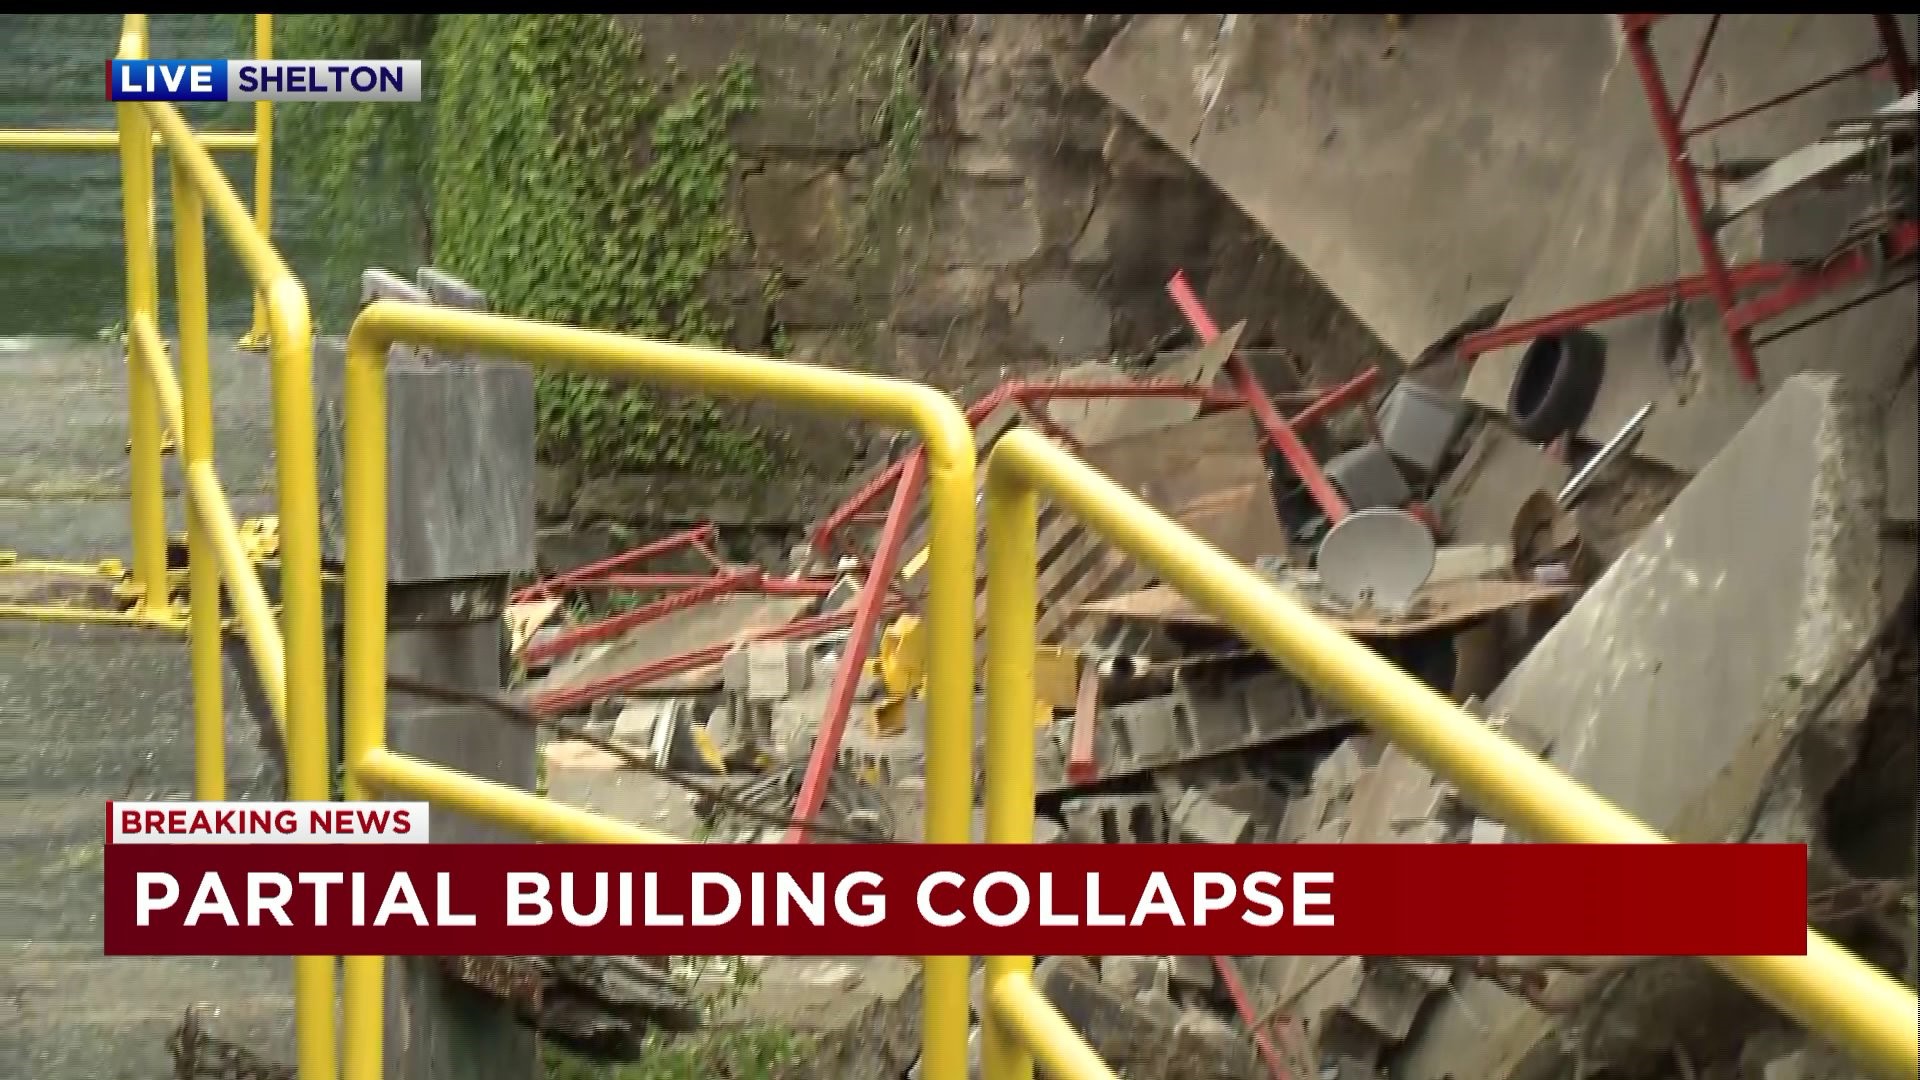 Building collapses